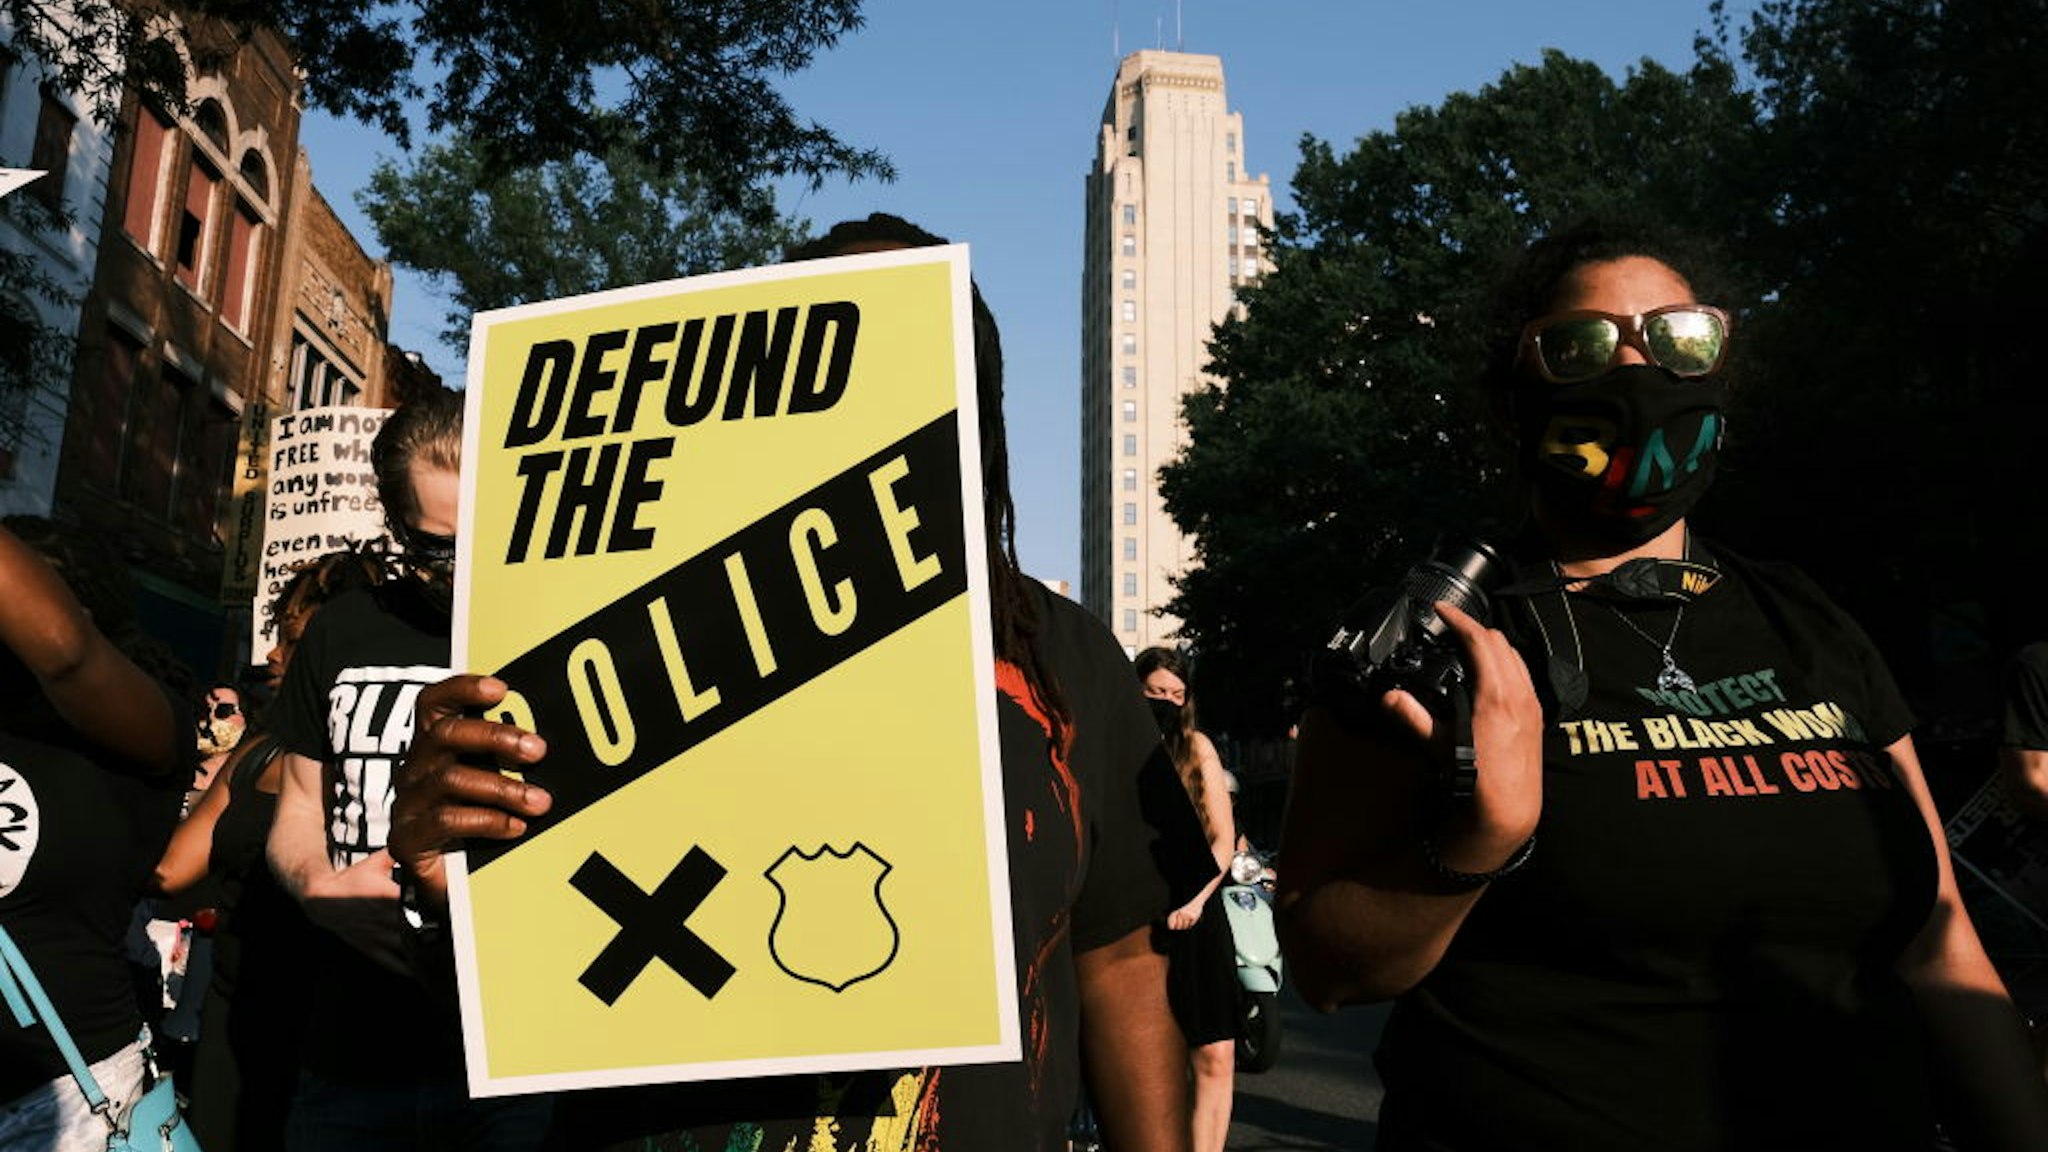 RICHMOND, VA - JULY 03: A protester carries a sign that reads "Defund The Police" during the Black Women Matter "Say Her Name" march on July 3, 2020 in Richmond, Virginia. Protests continue around the country after the death of African Americans while in police custody. (Photo by Eze Amos/Getty Images)